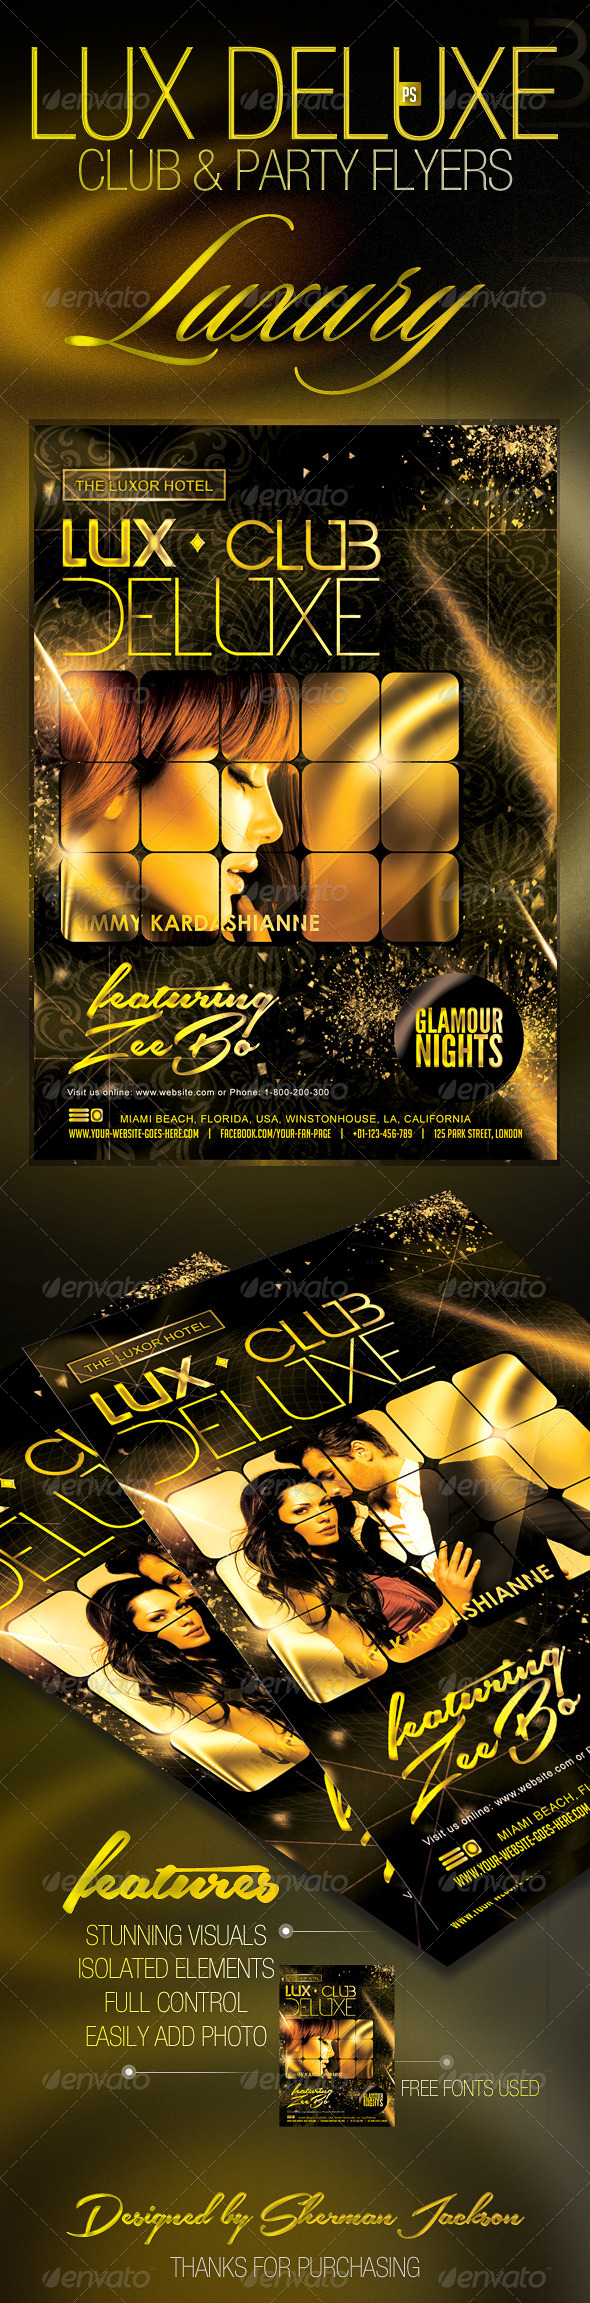 GraphicRiver Lux Deluxe VIP Club Party Flyer 7666811